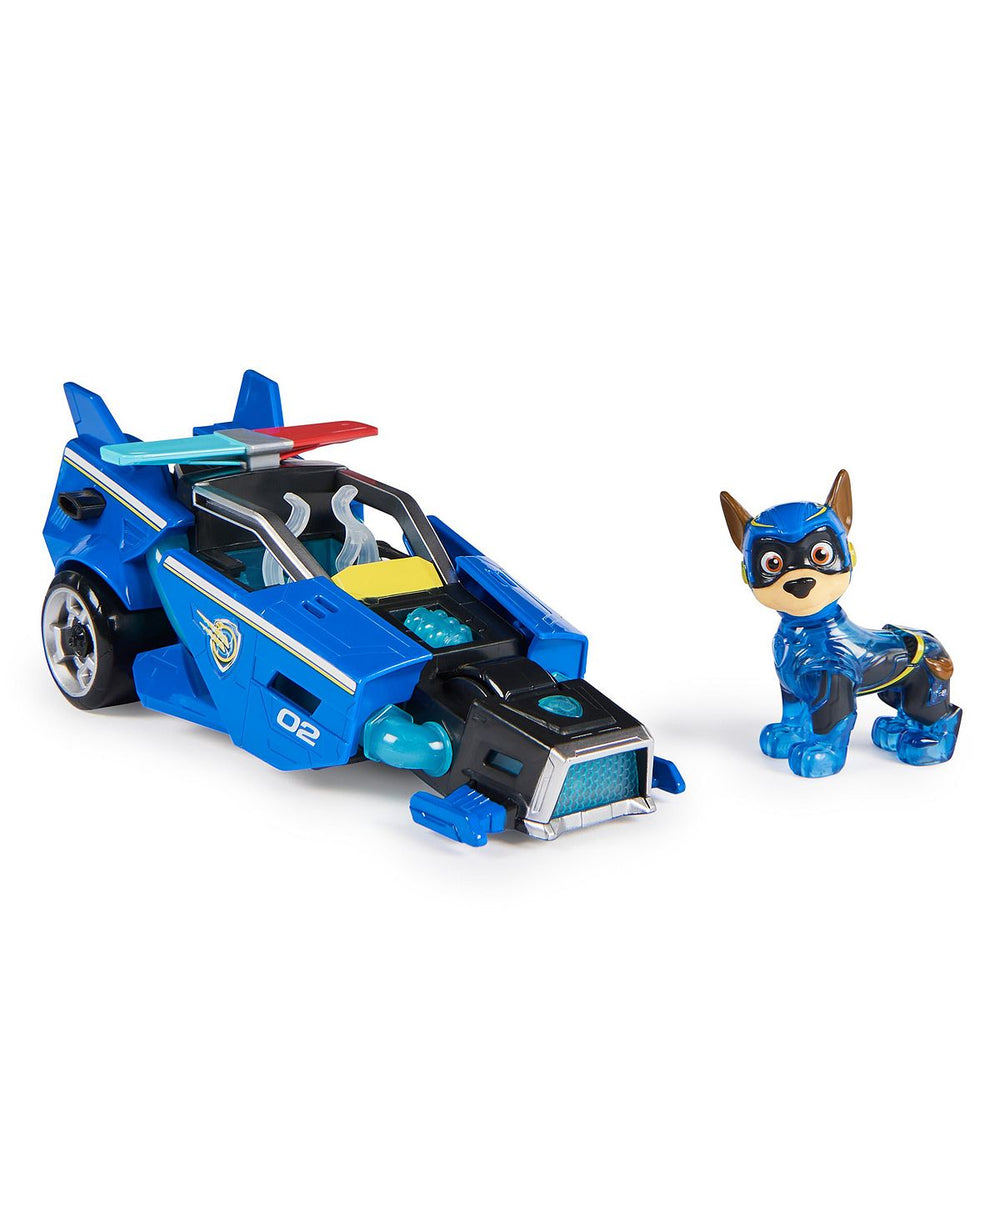 PAW Patrol Mighty Movie Chase's Transforming Police Car Toy with Action Figure